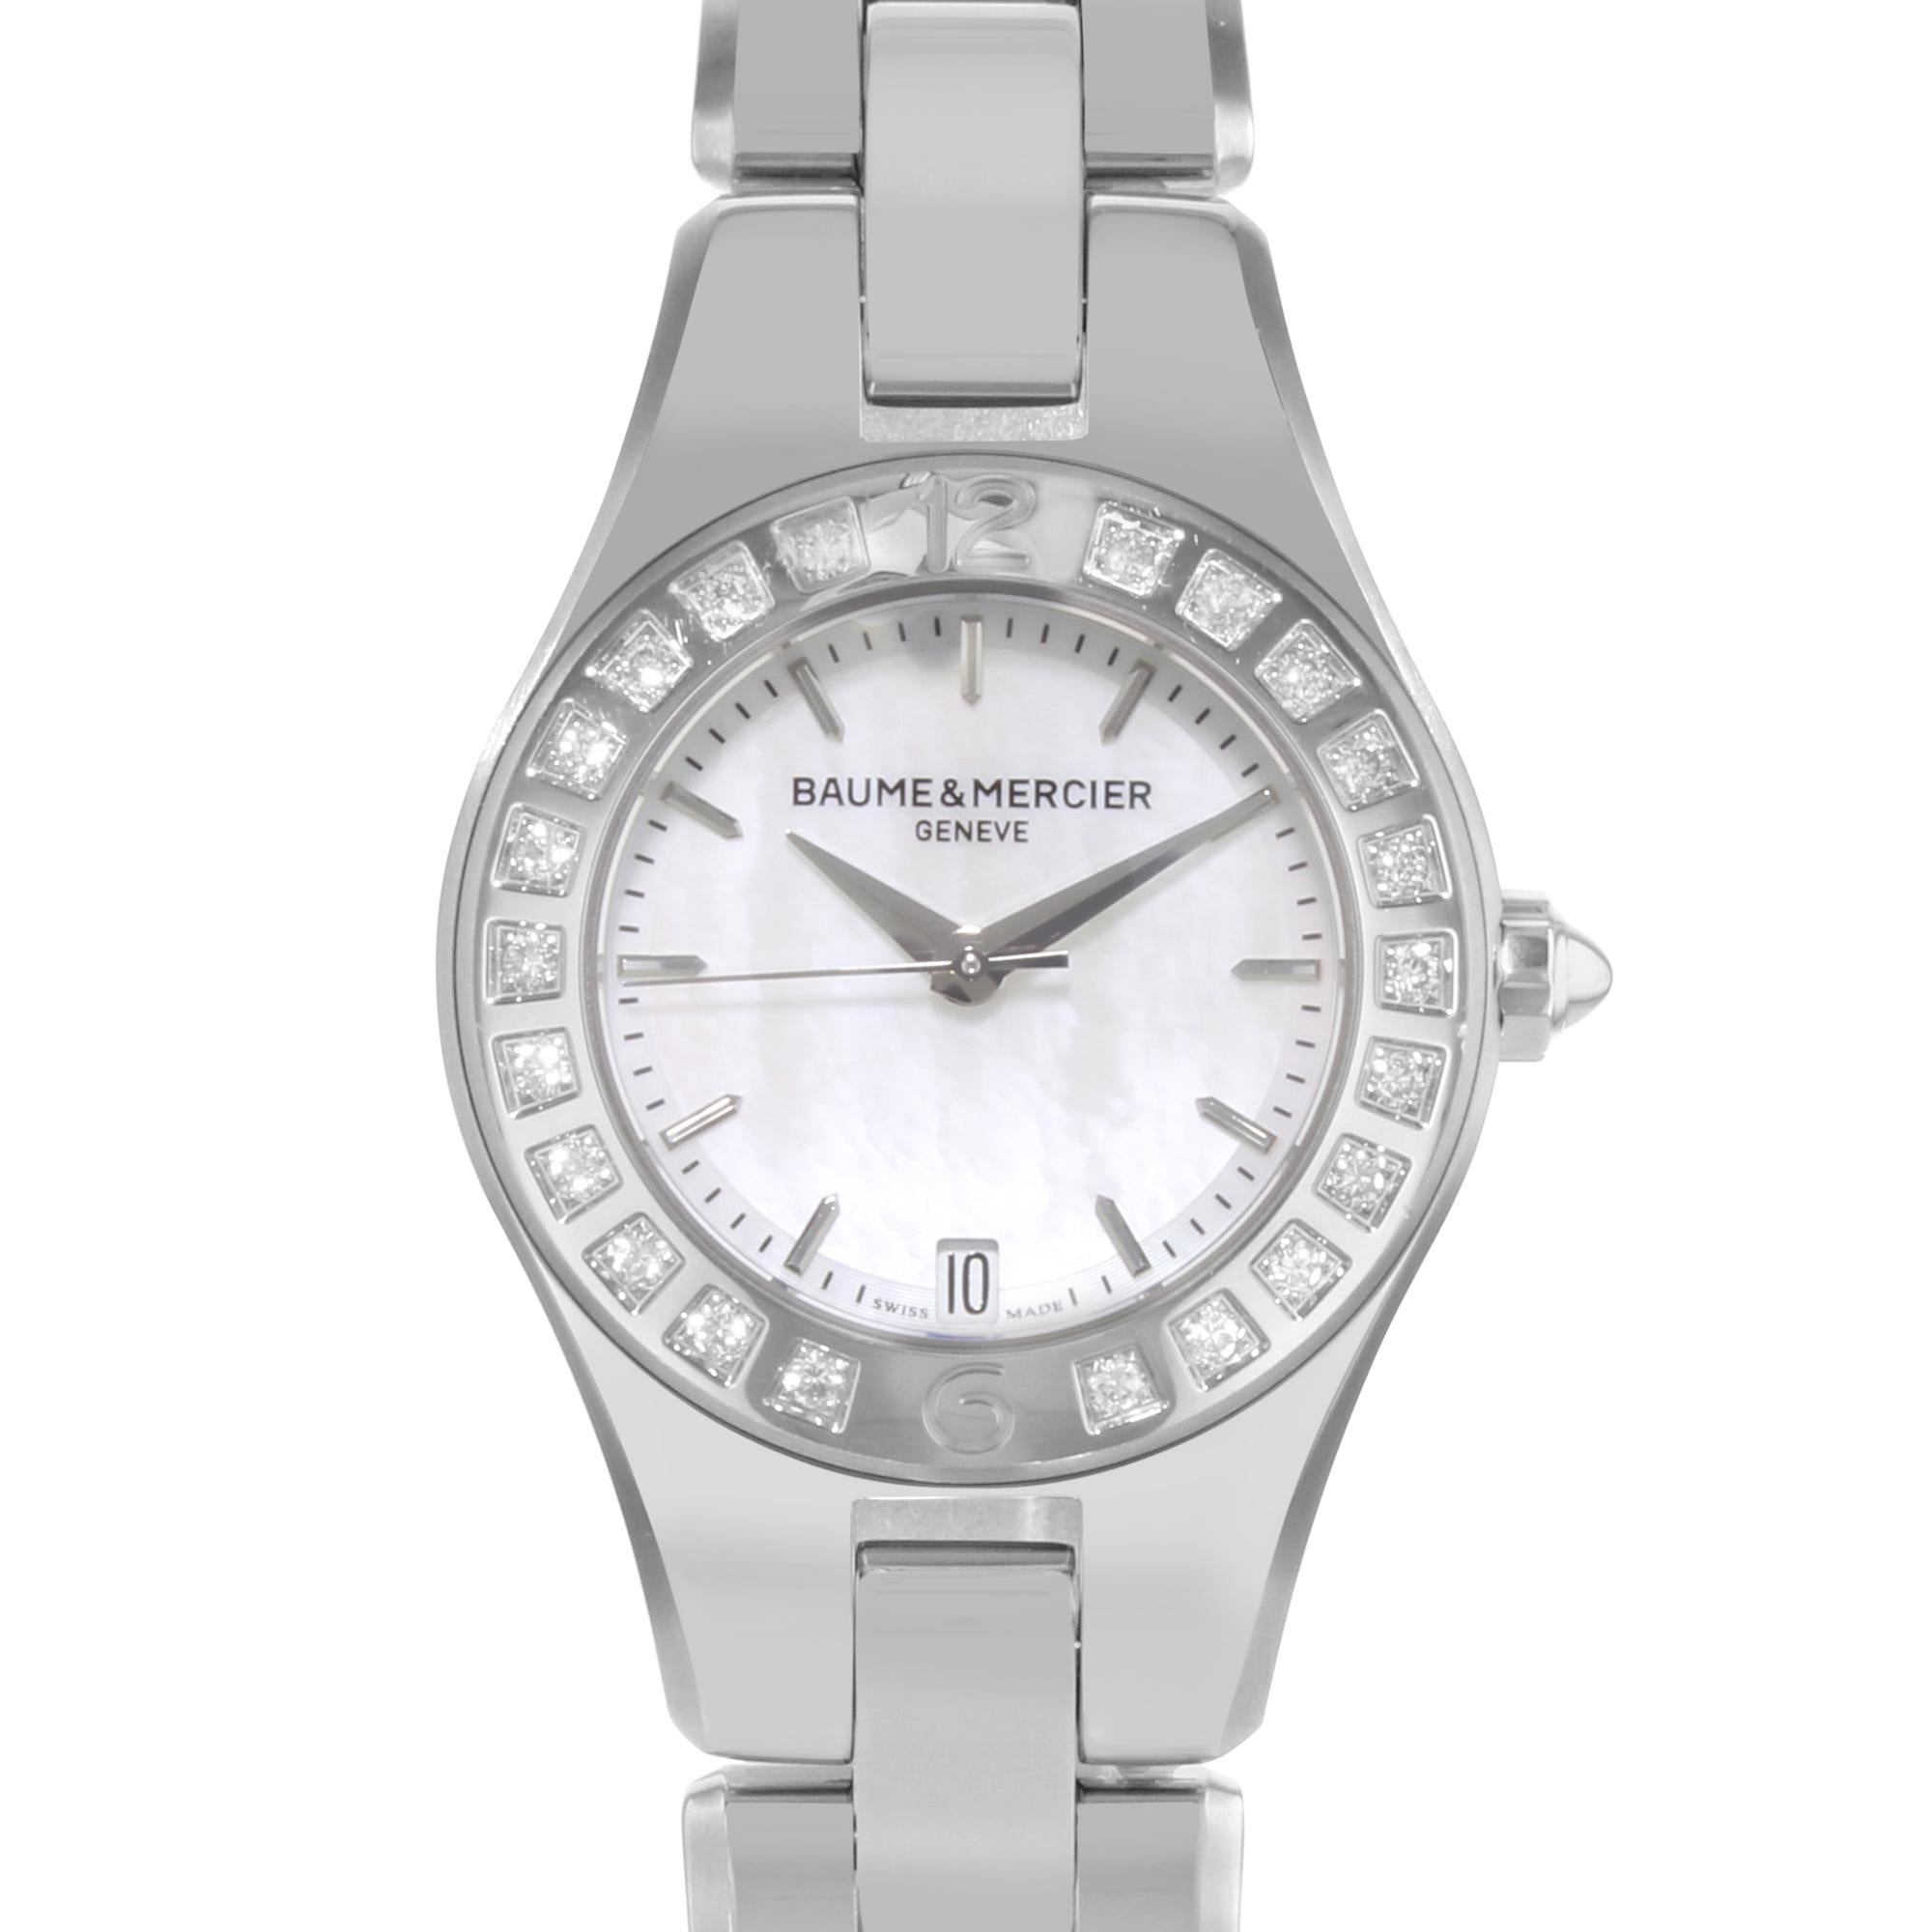 This never been worn  Baume et Mercier Linea MOA10078 is a beautiful Ladies timepiece that is powered by a quartz movement which is cased in a stainless steel case. It has a round shape face, date dial, and has hand sticks style markers. It is